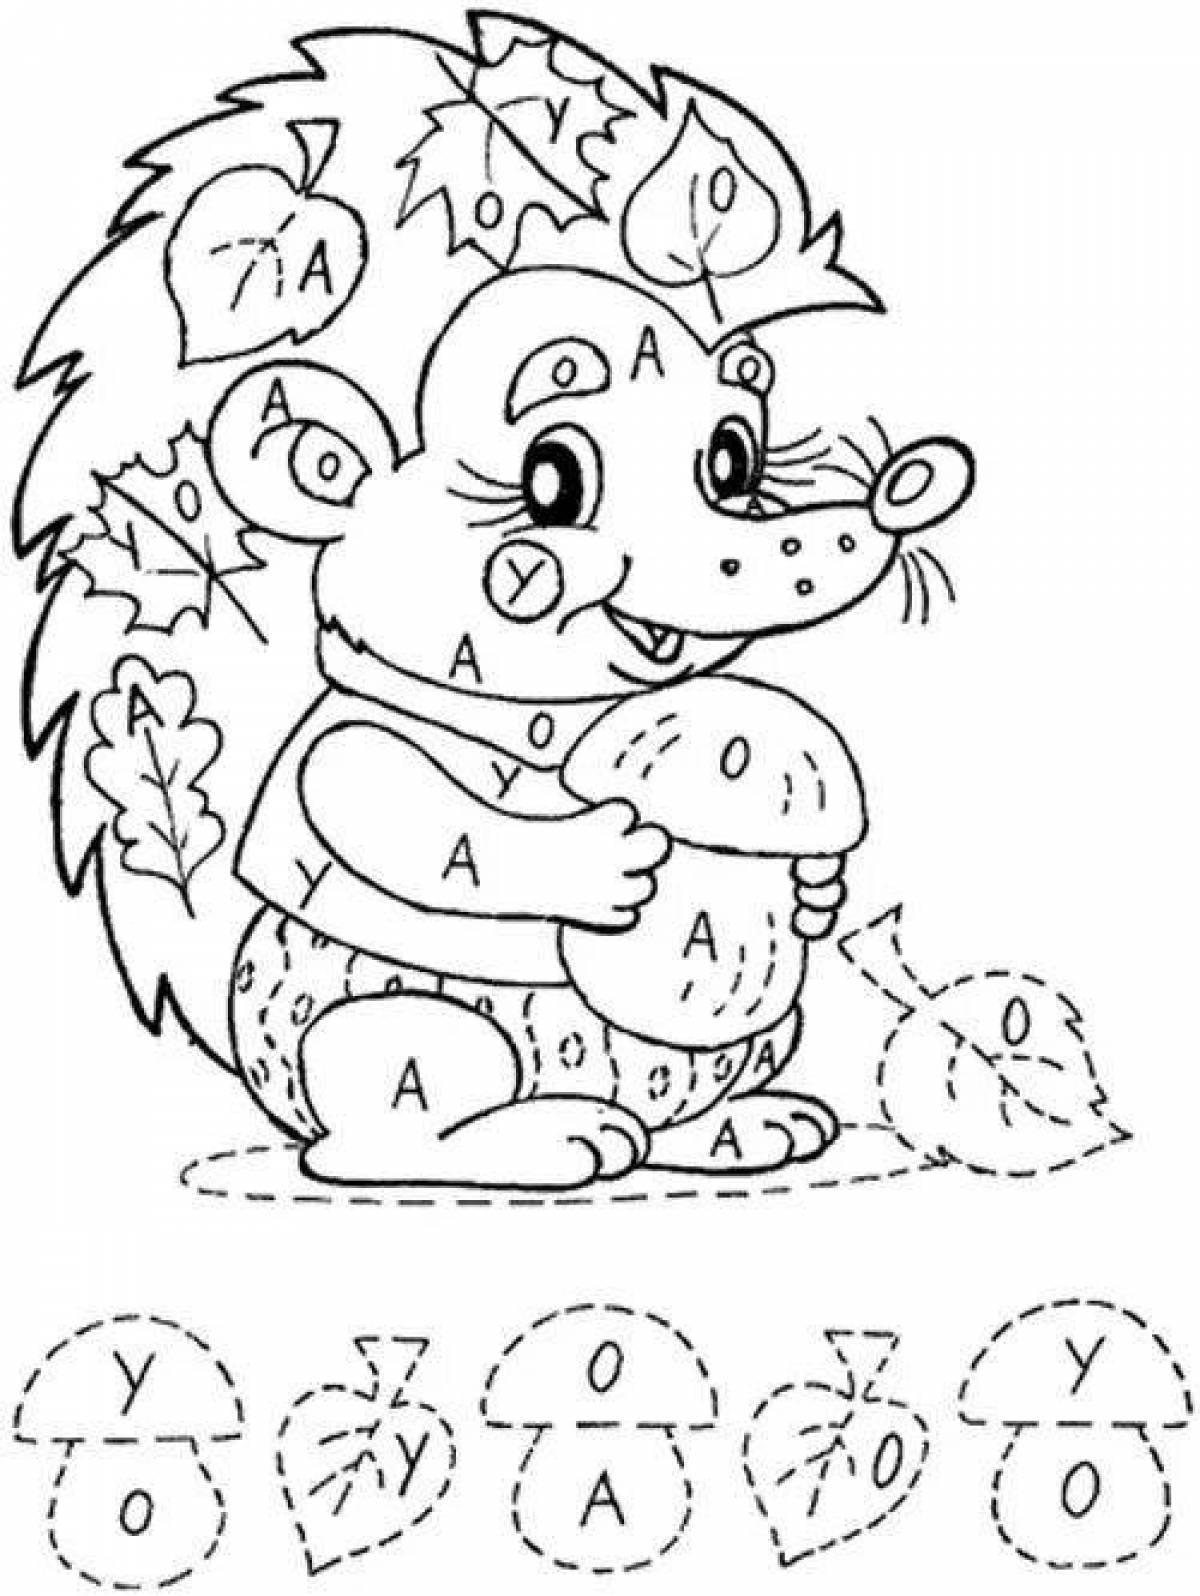 Color-frenzy vowels coloring page for preschoolers